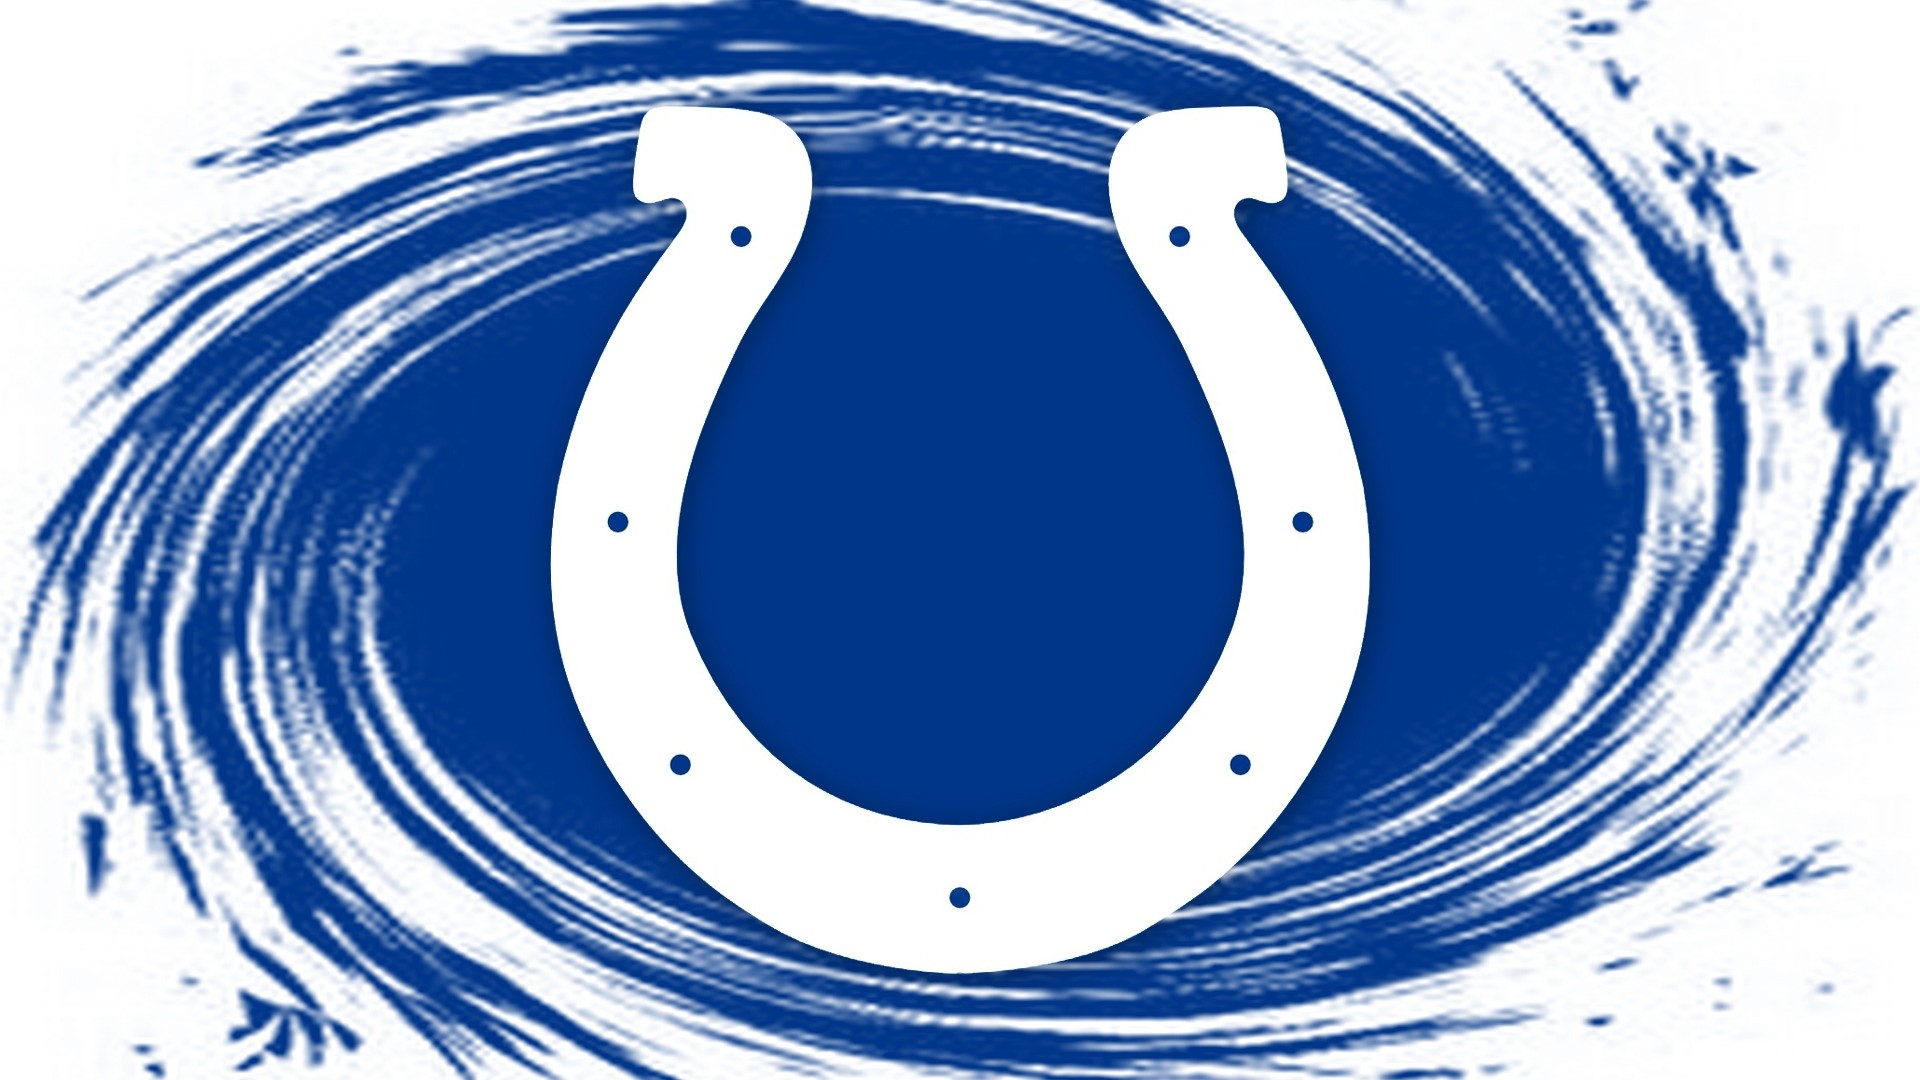 HD Backgrounds Indianapolis Colts With Resolution 1920X1080